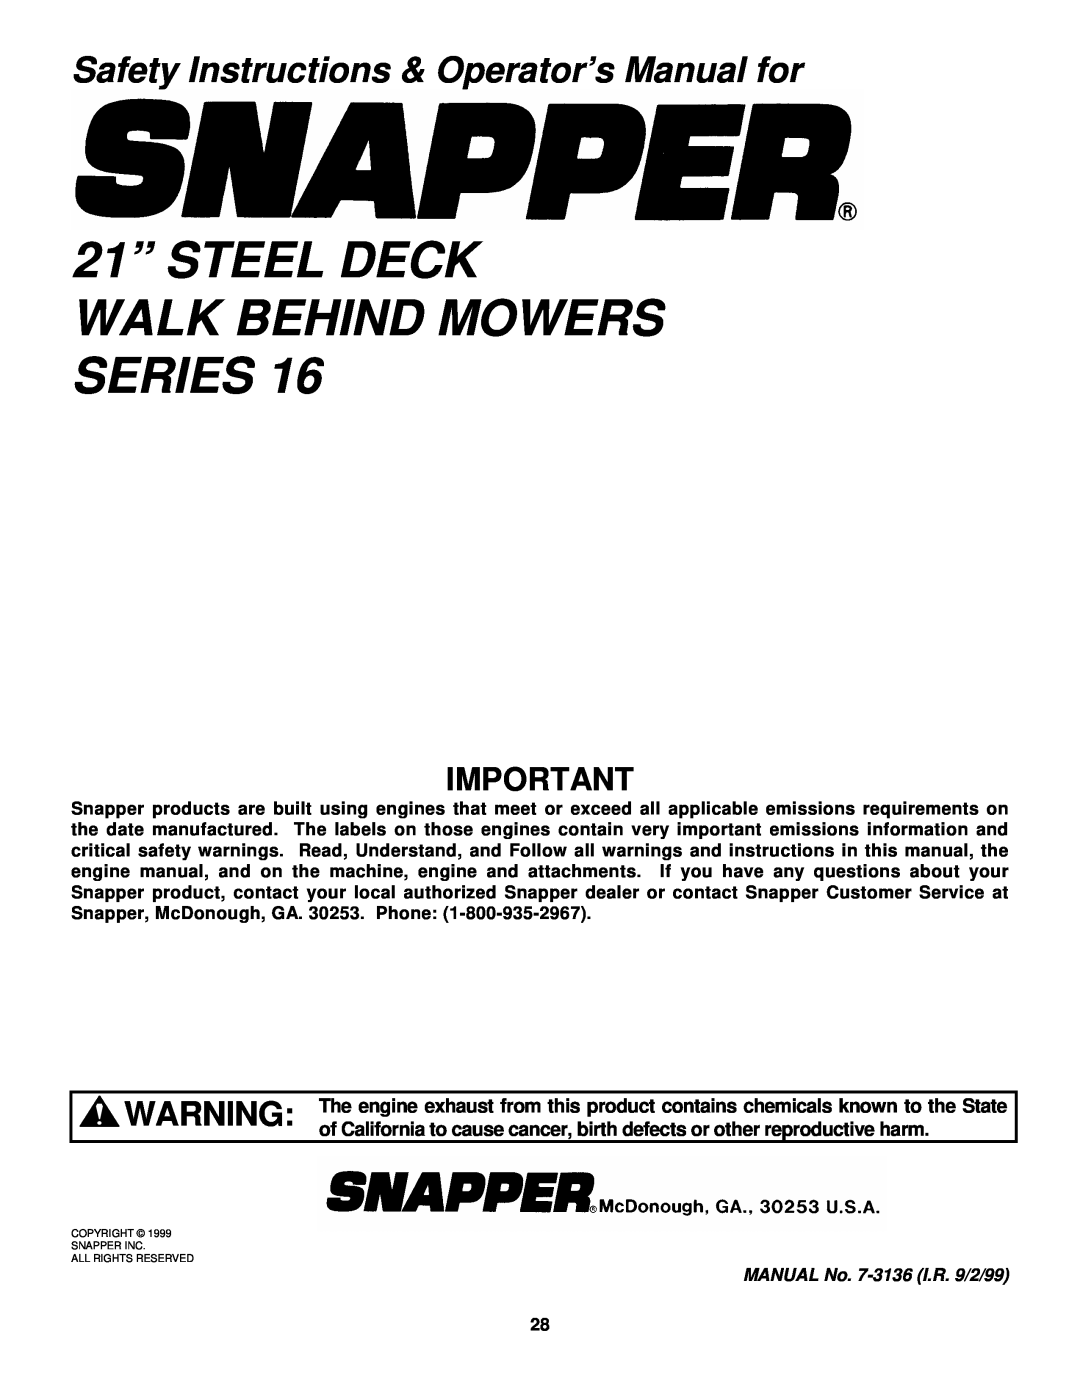 Snapper FRP216016 21” STEEL DECK WALK BEHIND MOWERS SERIES, Safety Instructions & Operator’s Manual for 